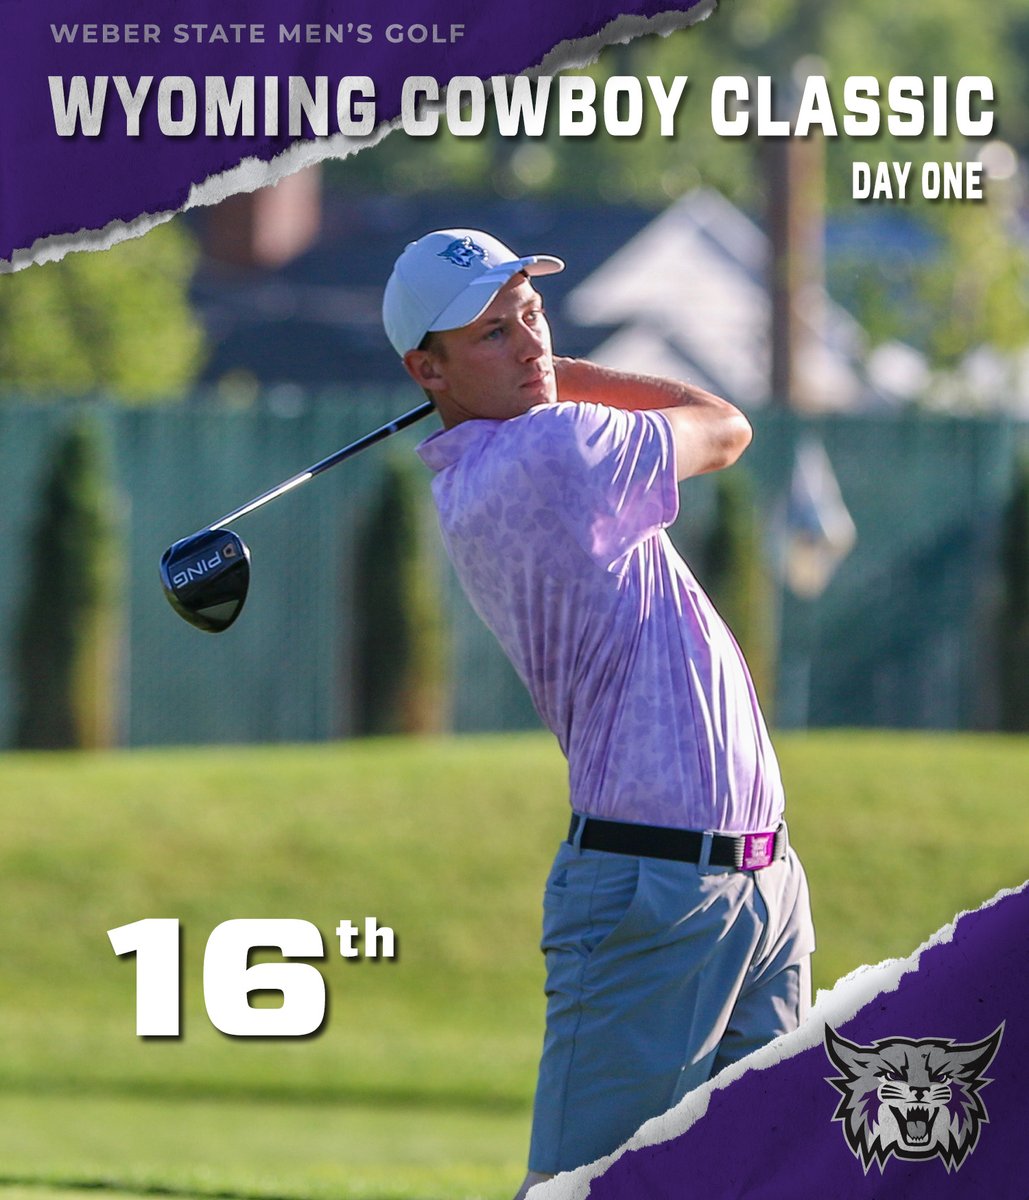 With about 4 holes remaining in the 2nd round, play at the Cowboy Classic was halted for the day due to lightning. Play will resume in the morning prior to the final round. The Wildcats are in 16th place in the 23-team field. Hayden Banz (-6, T11) leads the way for WSU.